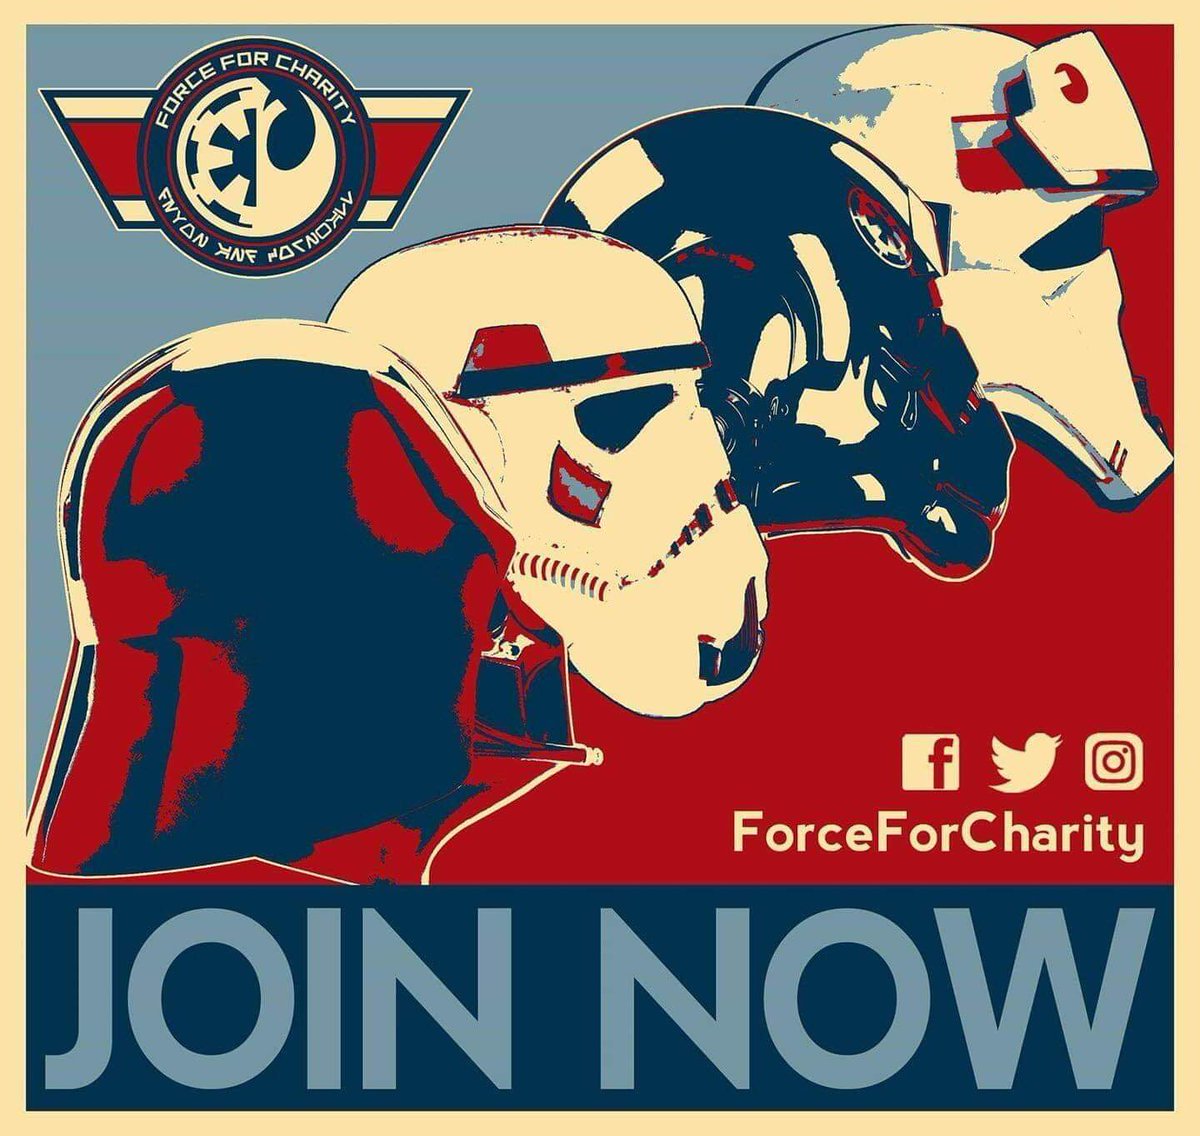 THE EMPIRE NEEDS YOU! We are always on the look out for new members! If you or a friend has a high quality Star Wars costume or would like to know how to make one and wish to help raise money for some fantastic charities please get in touch! @ForceForCharity #Forceforcharity